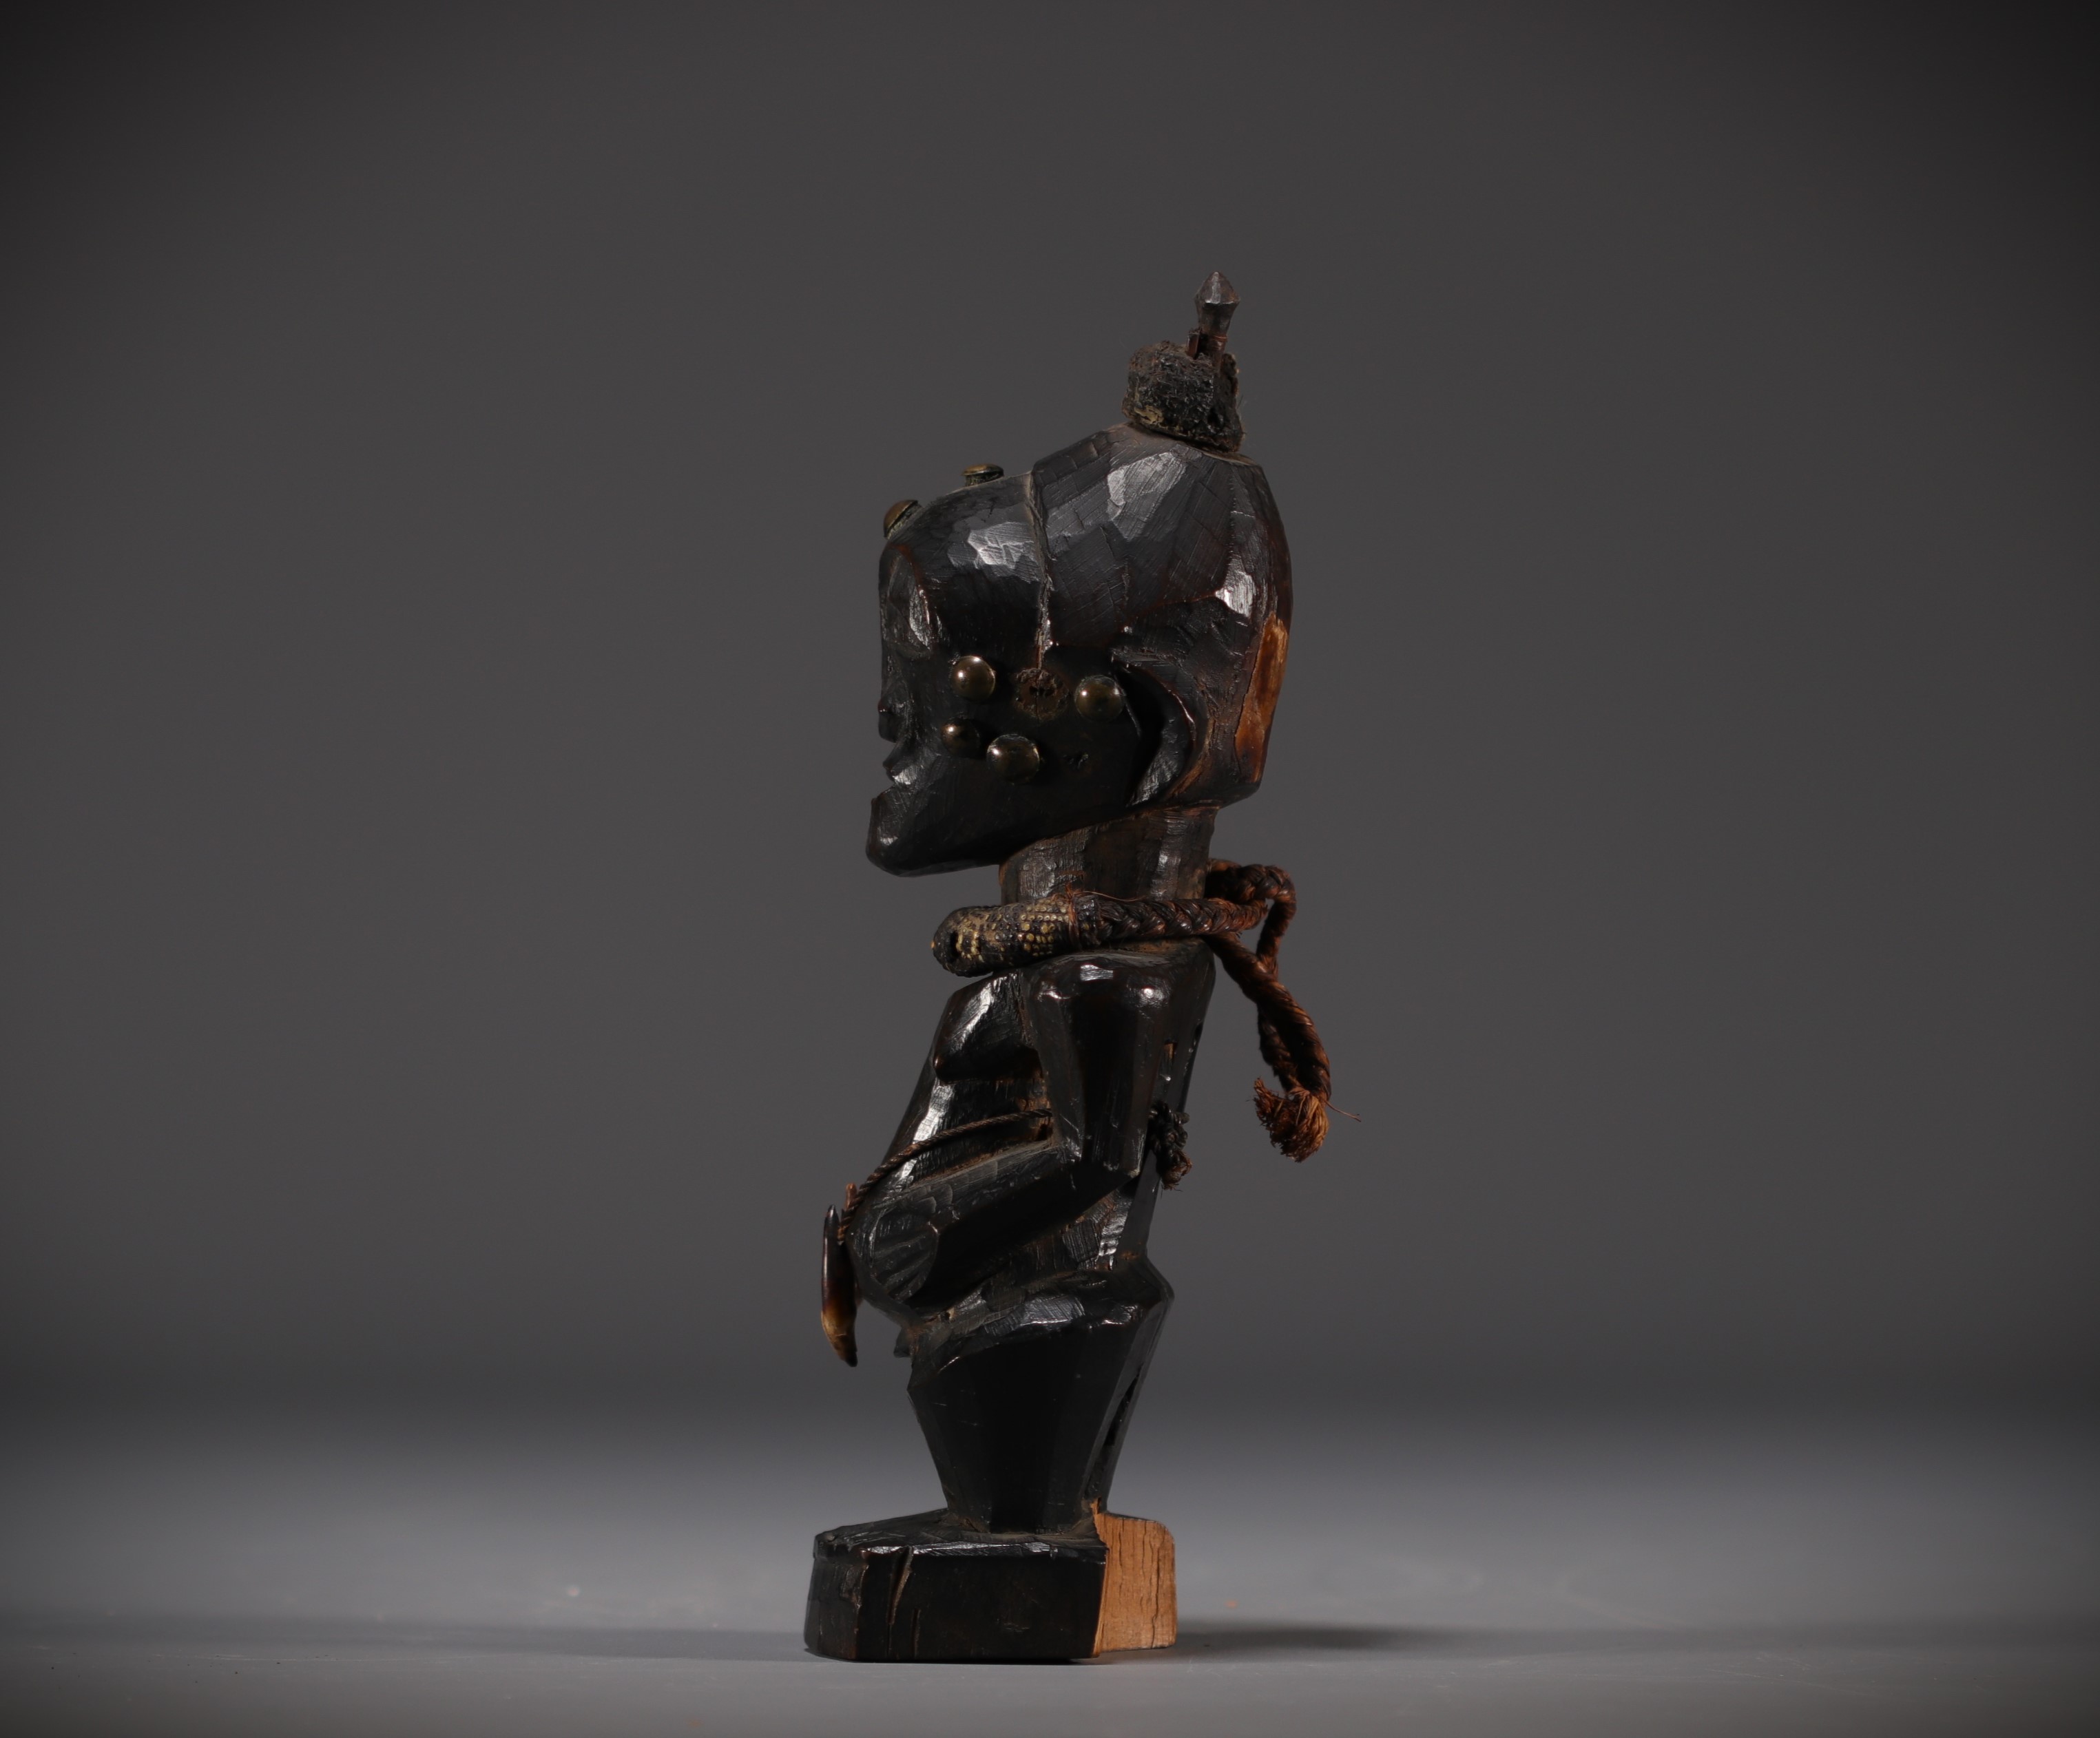 SONGYE ritual figure - collected around 1900 - Rep.Dem.Congo - Image 5 of 7